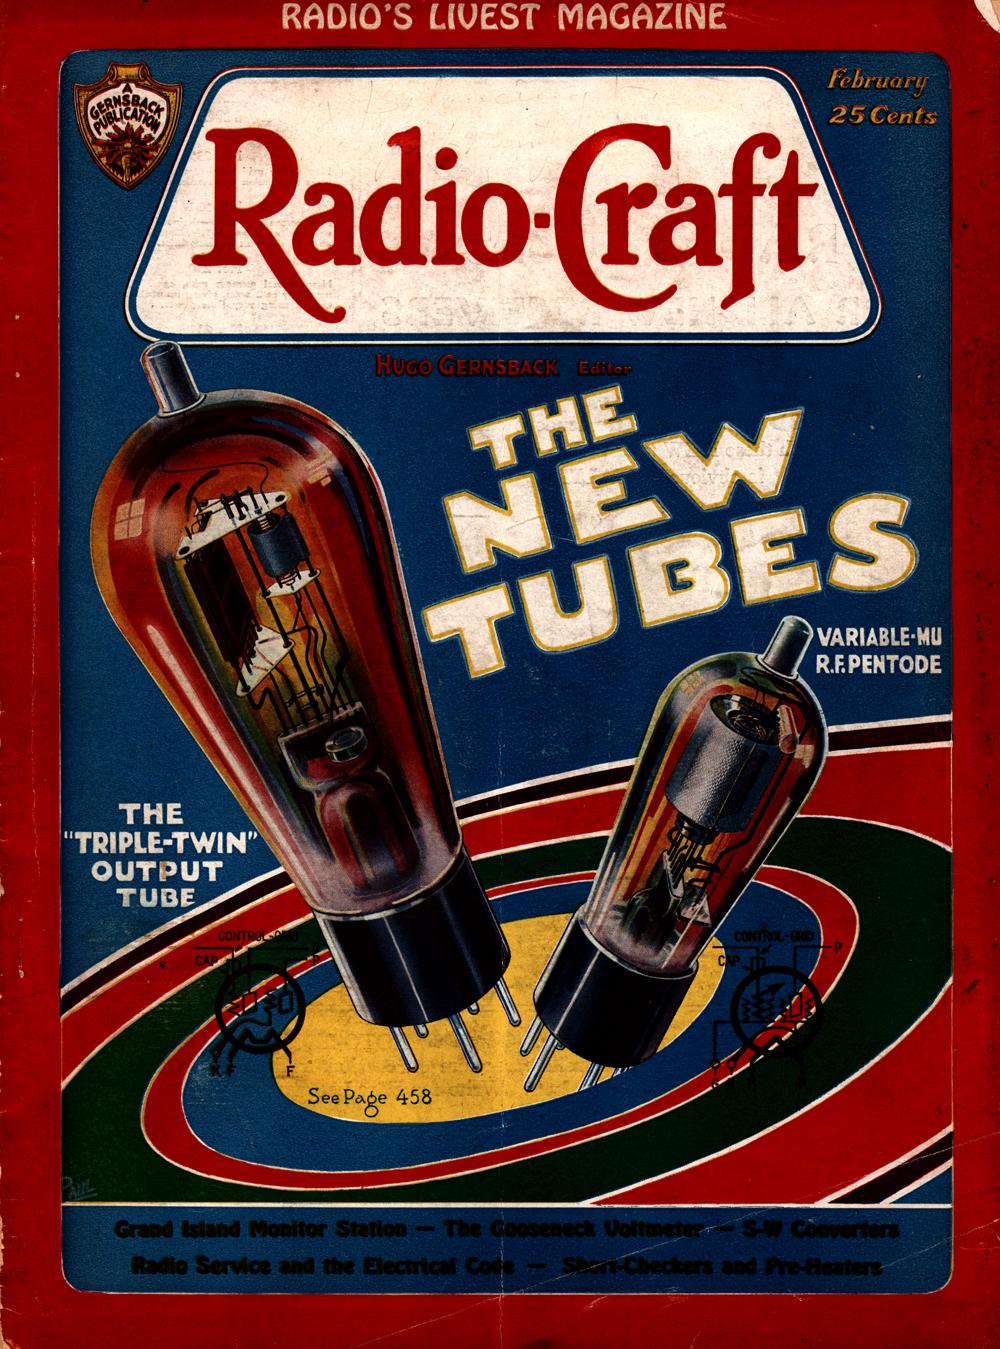 1932 - Radio-craft. and popular electronics; radio-electronics in all its phases - Vol. 3, No. 8